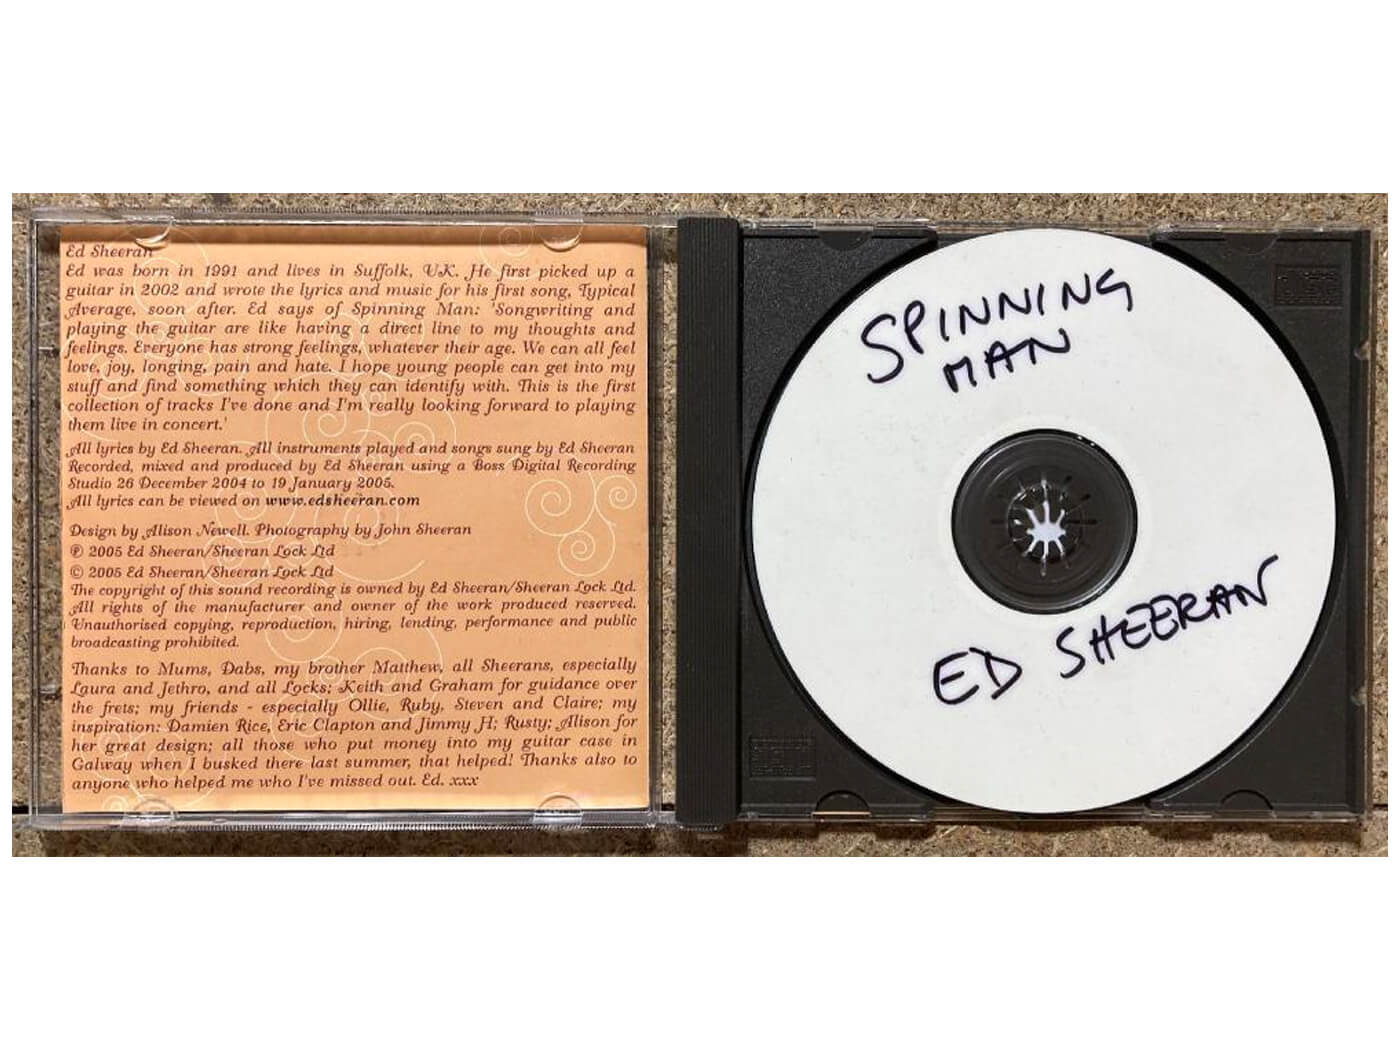 A rare Ed Sheeran demo CD which sounds "like Eric Clapton" is now ...